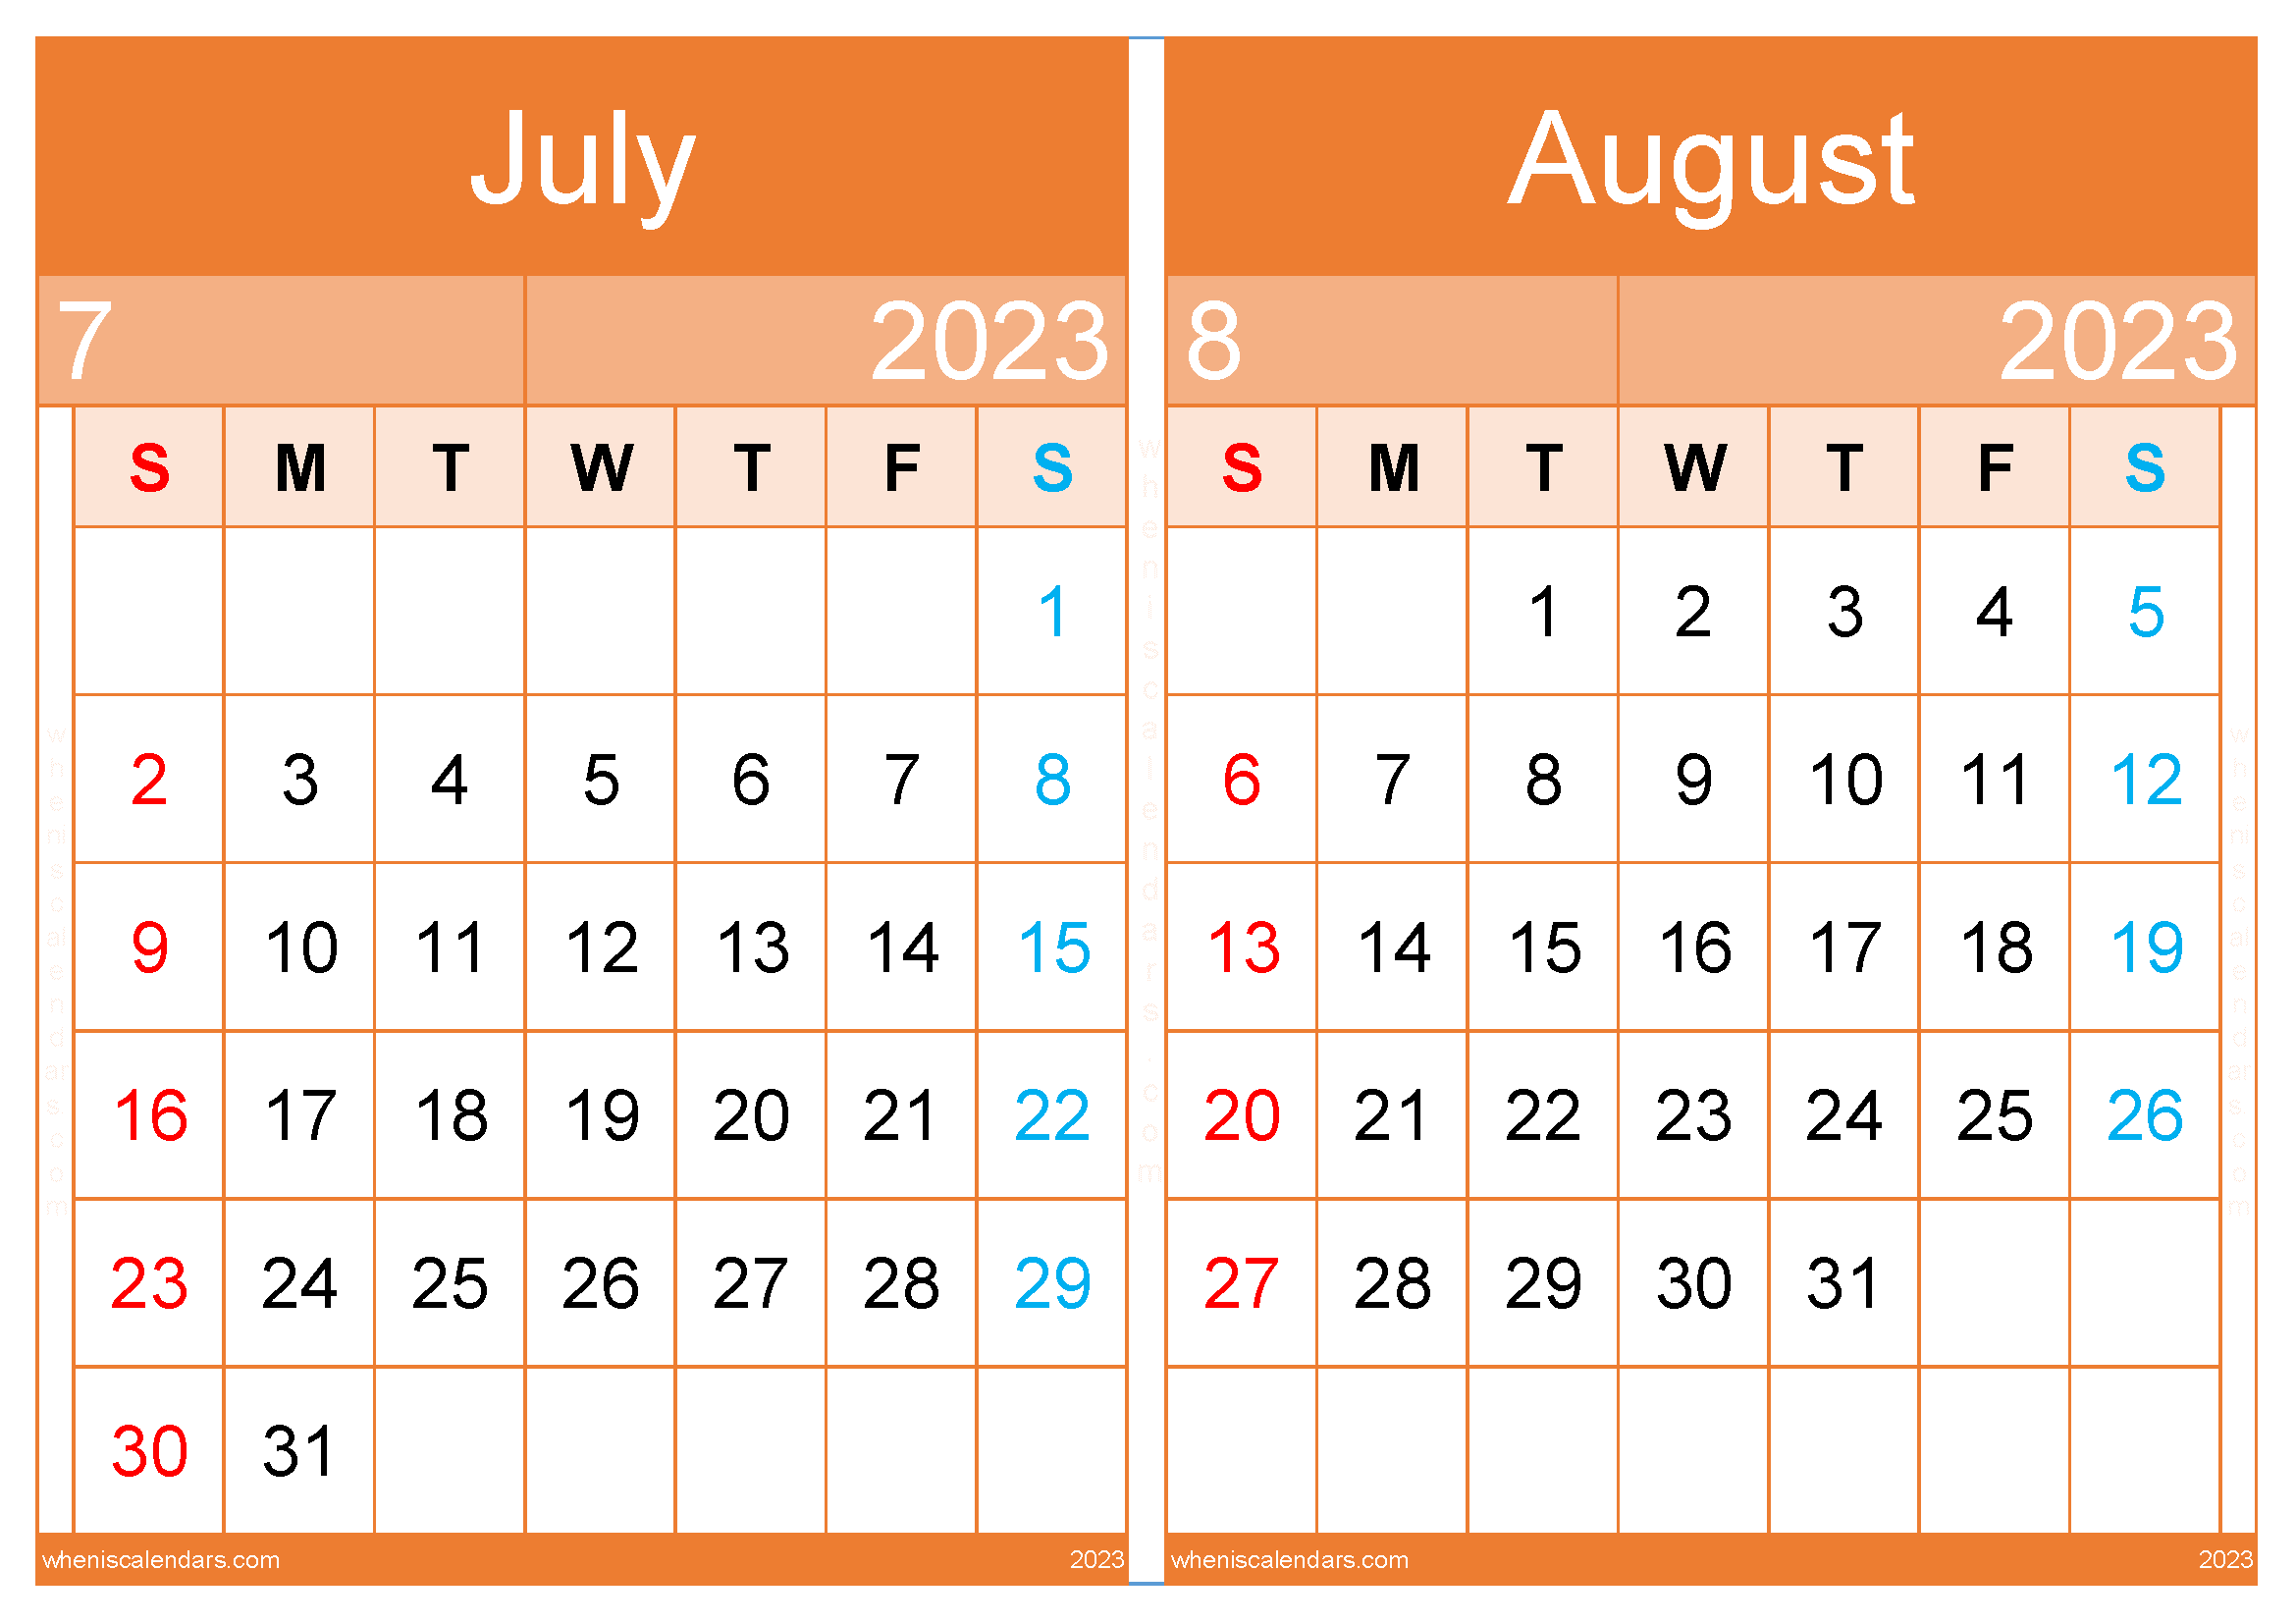 July and August Calendar 2023 Template (JA2312)